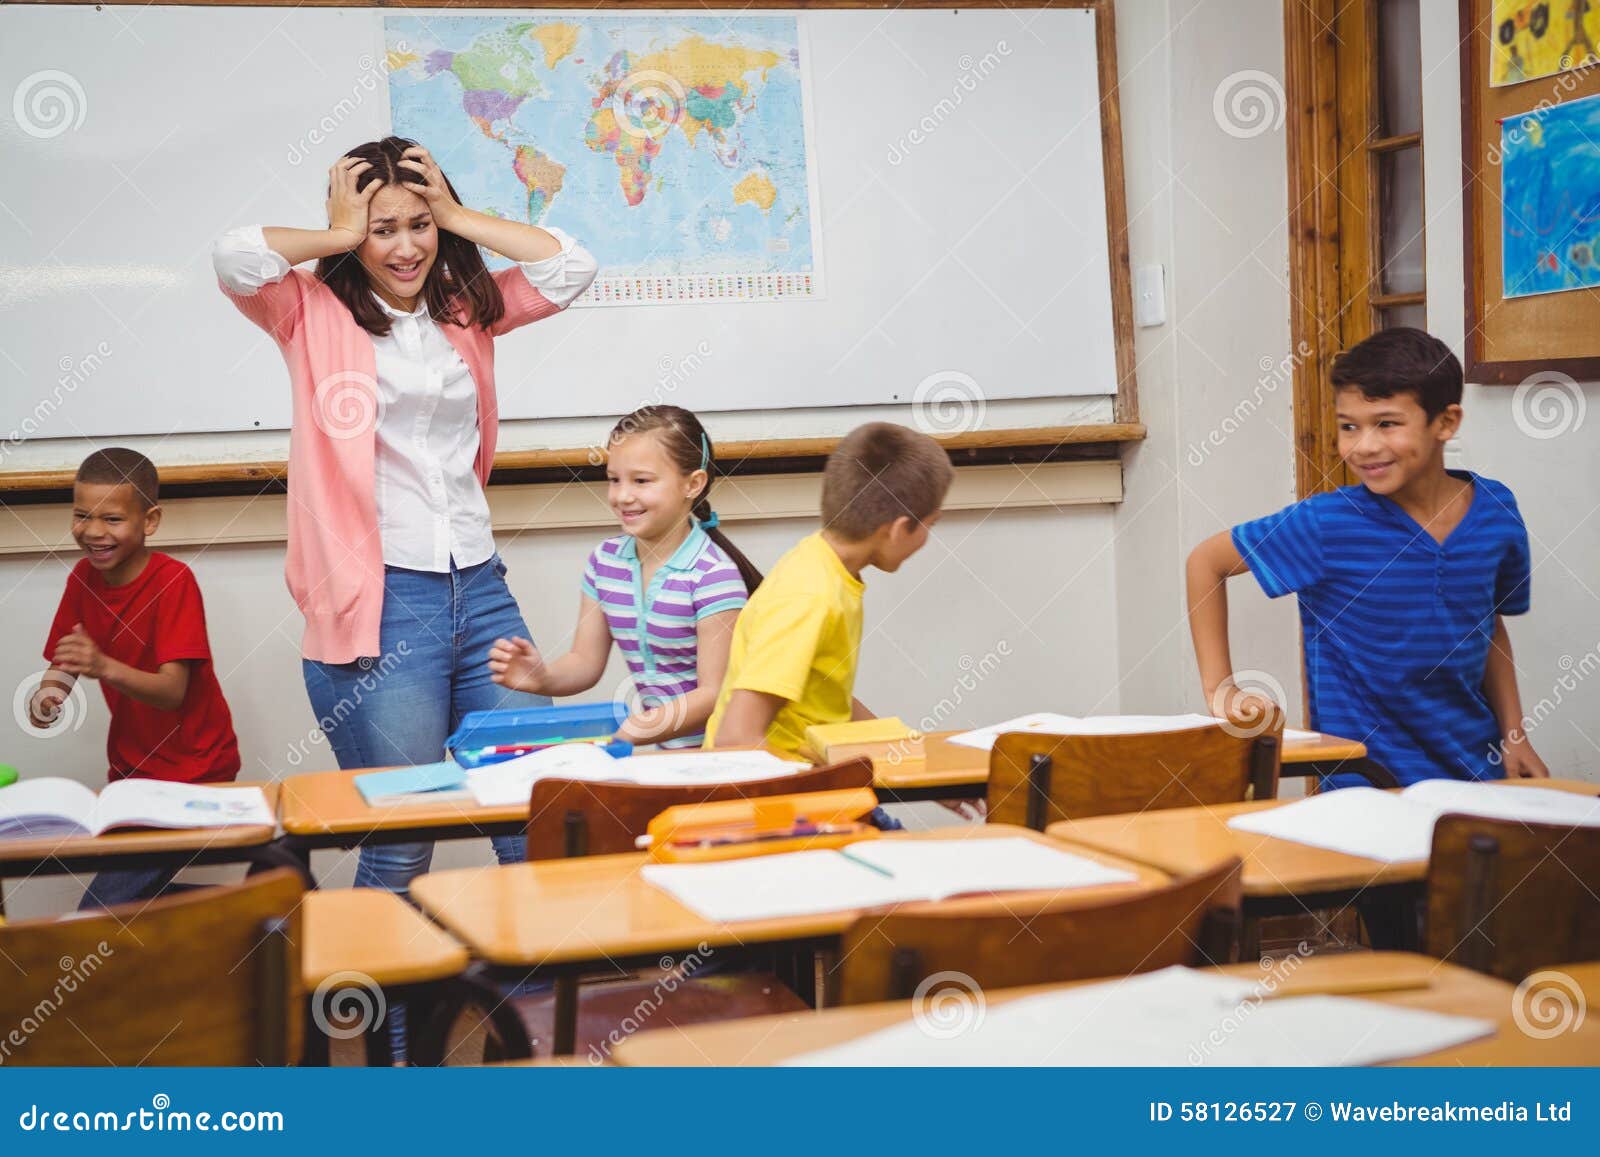 Students Driving The Teacher Crazy Stock Image - Image of indoors, child: 581265271300 x 957